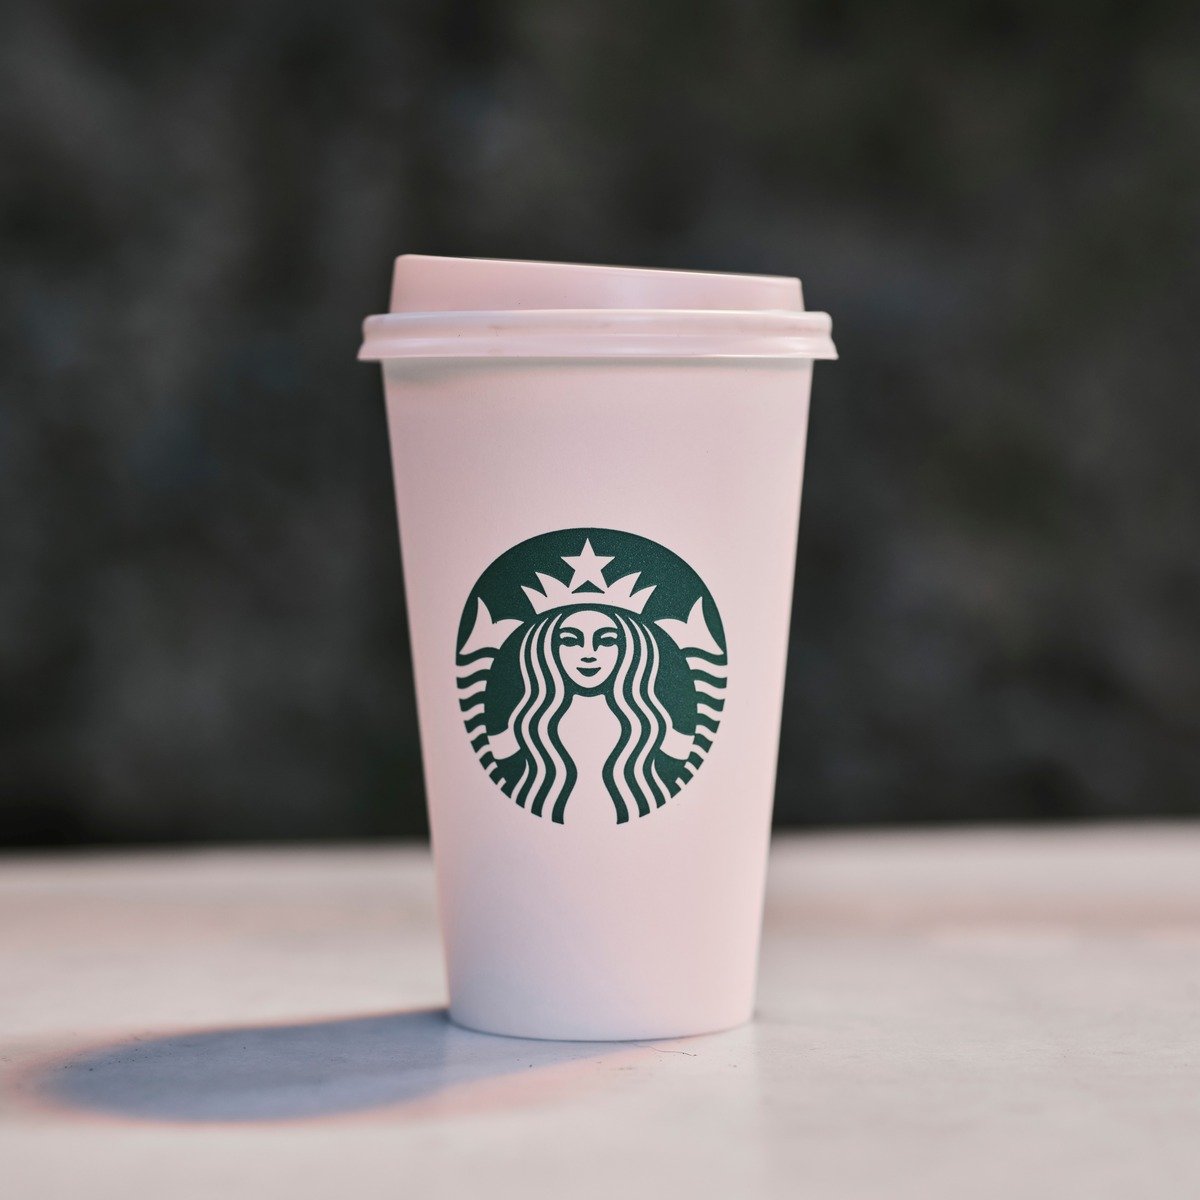 starbucks paper takeaway cup on white surface with shadow